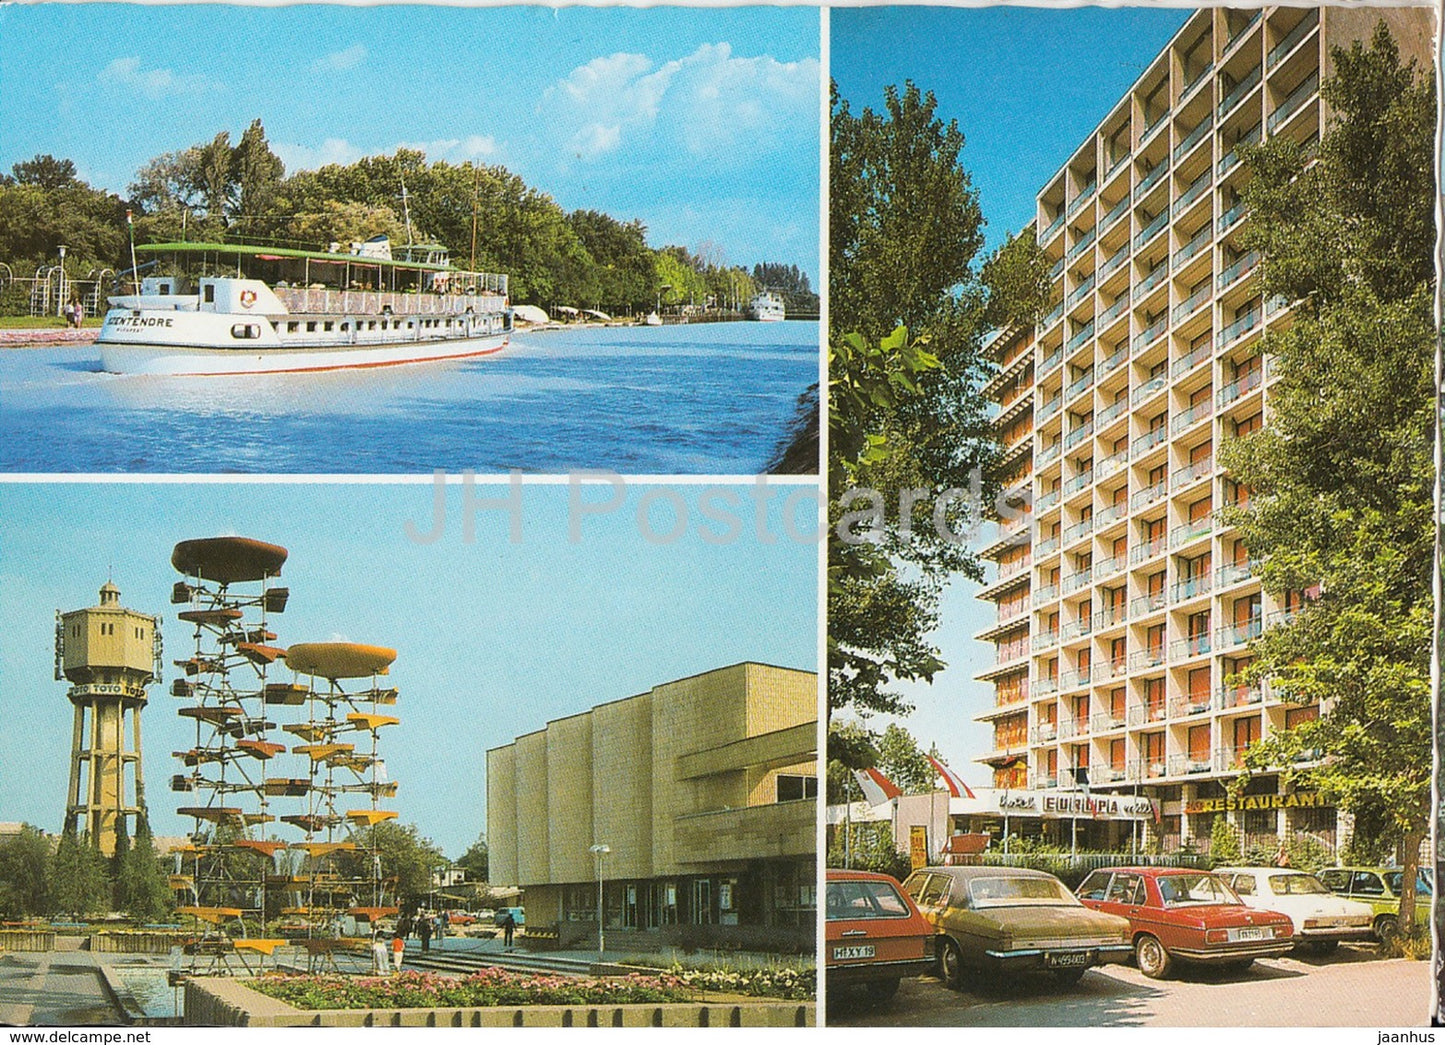 Siofok - passenger boat - hotel - cars - lighthouse - multiview - 1980s - Hungary - used - JH Postcards